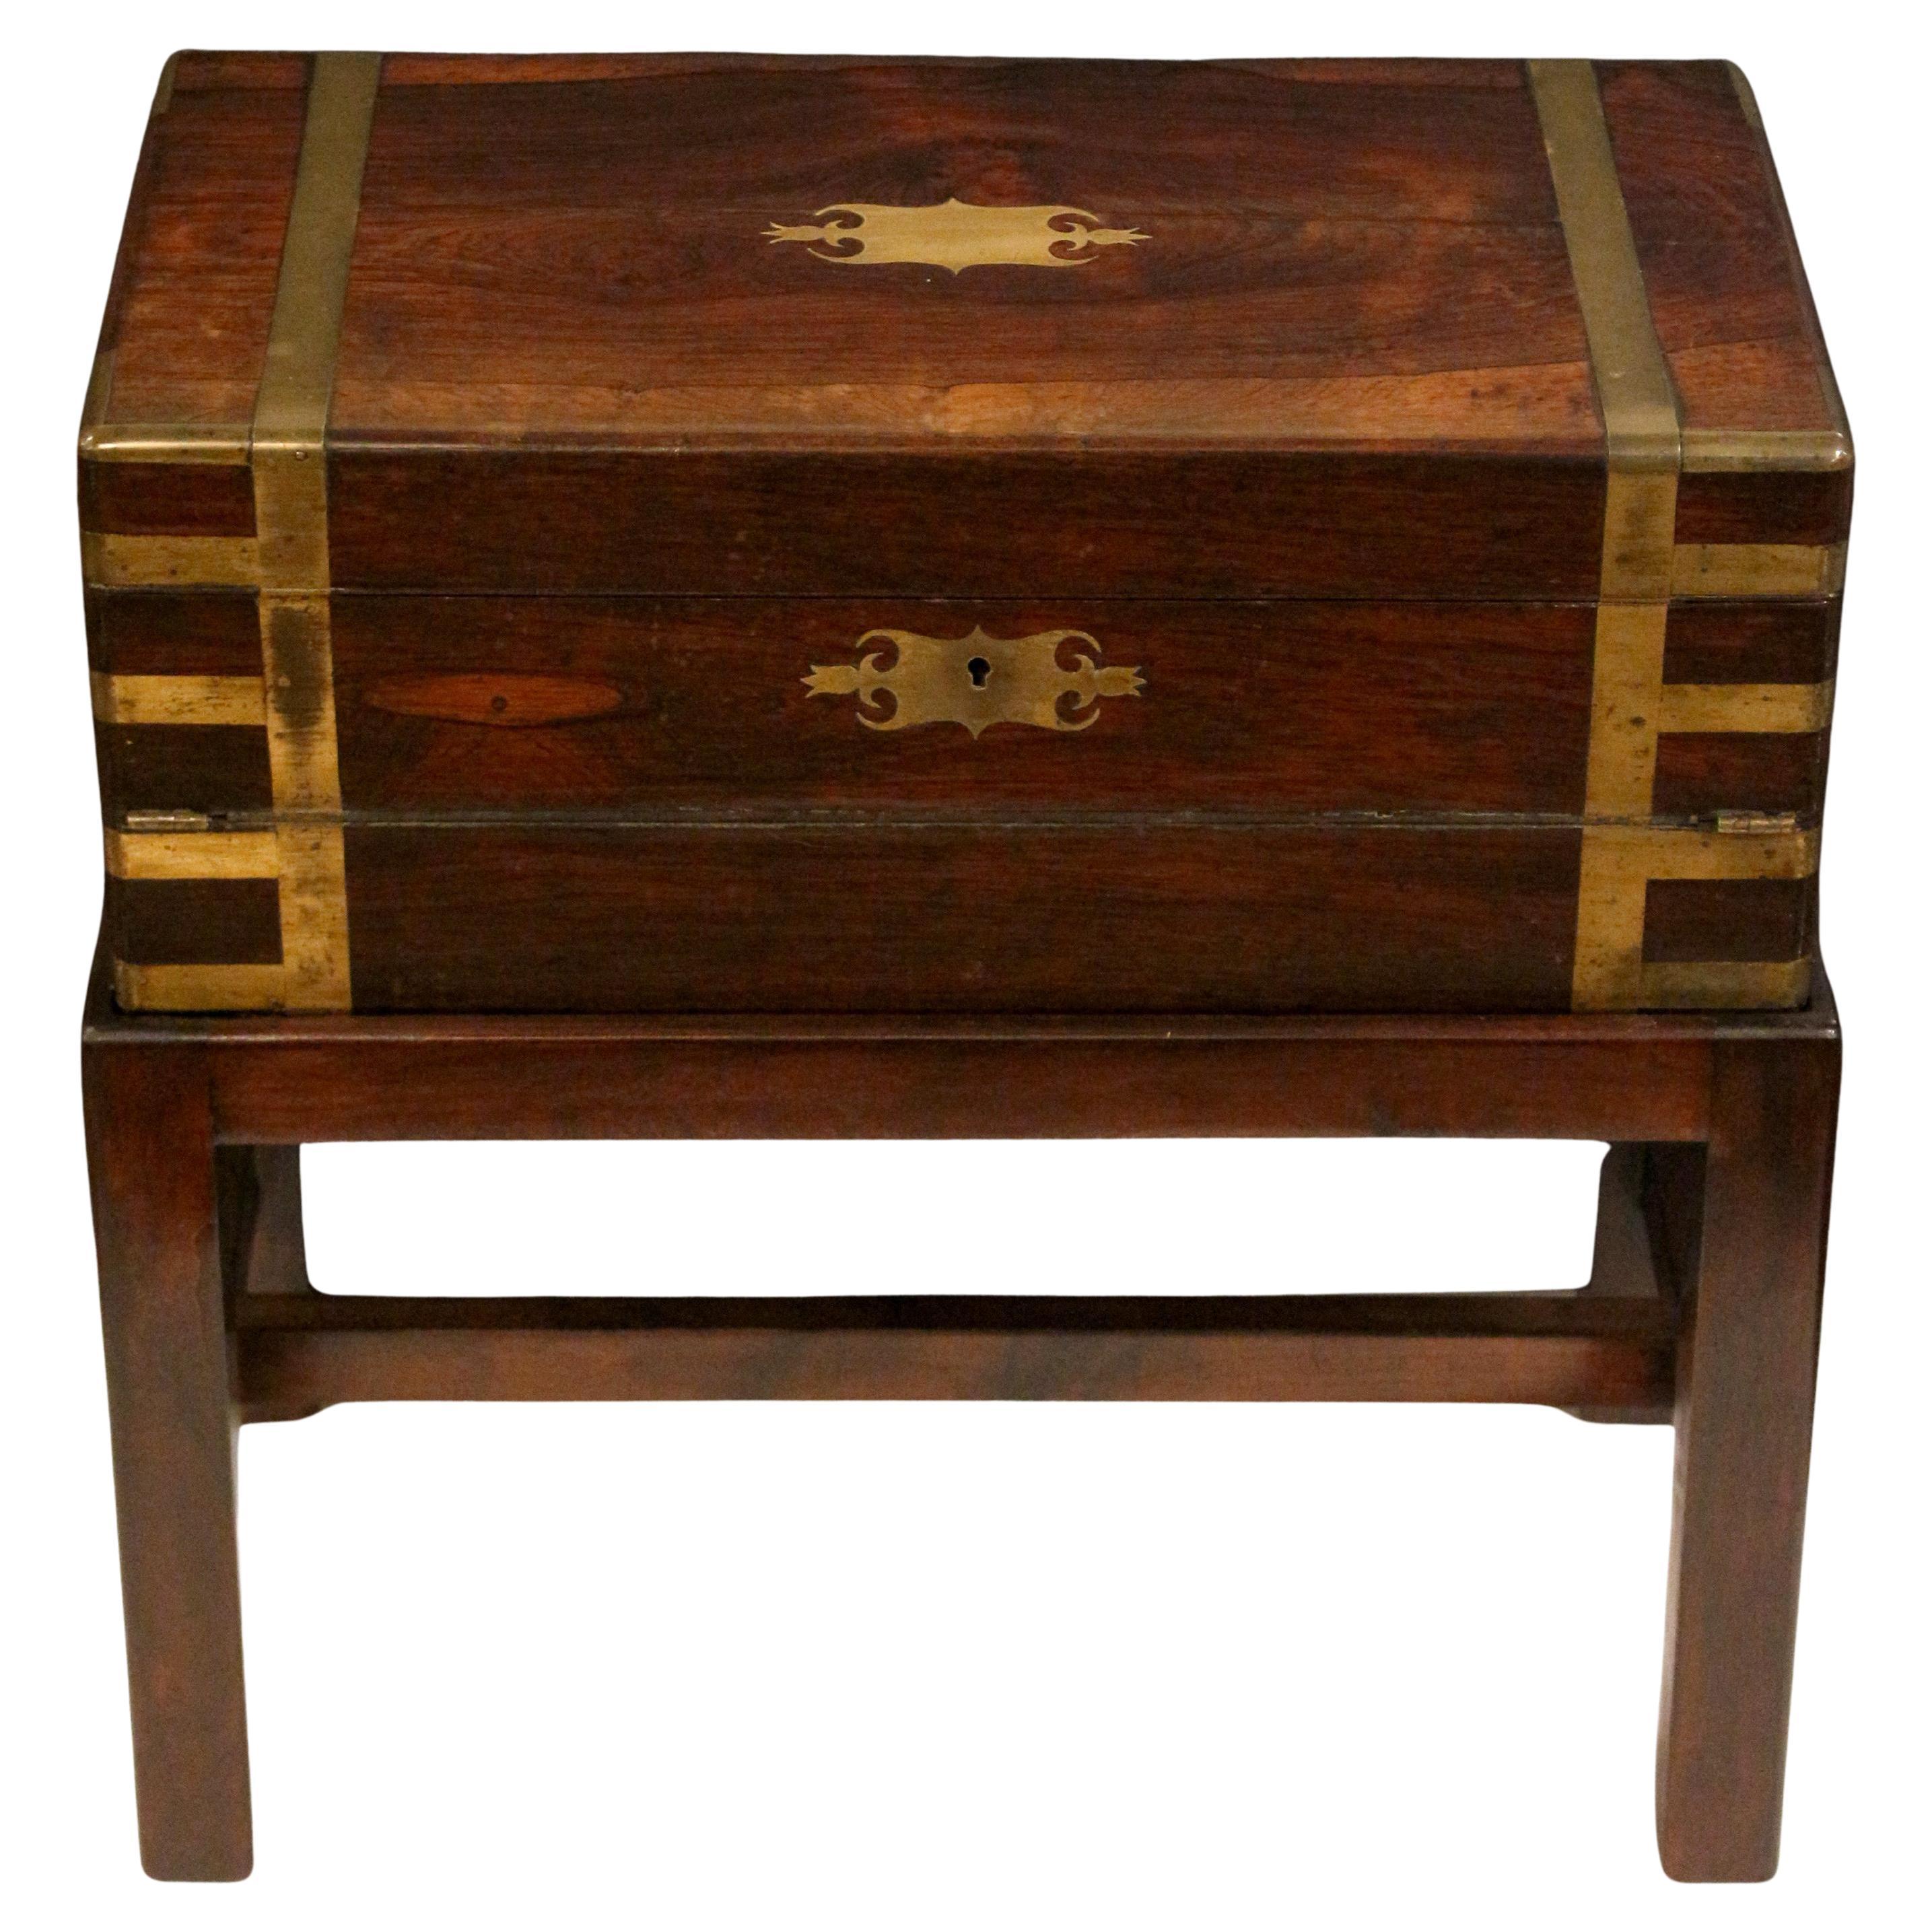 Early 19th Century English Campaign Lap Desk Box on Stand Side Table